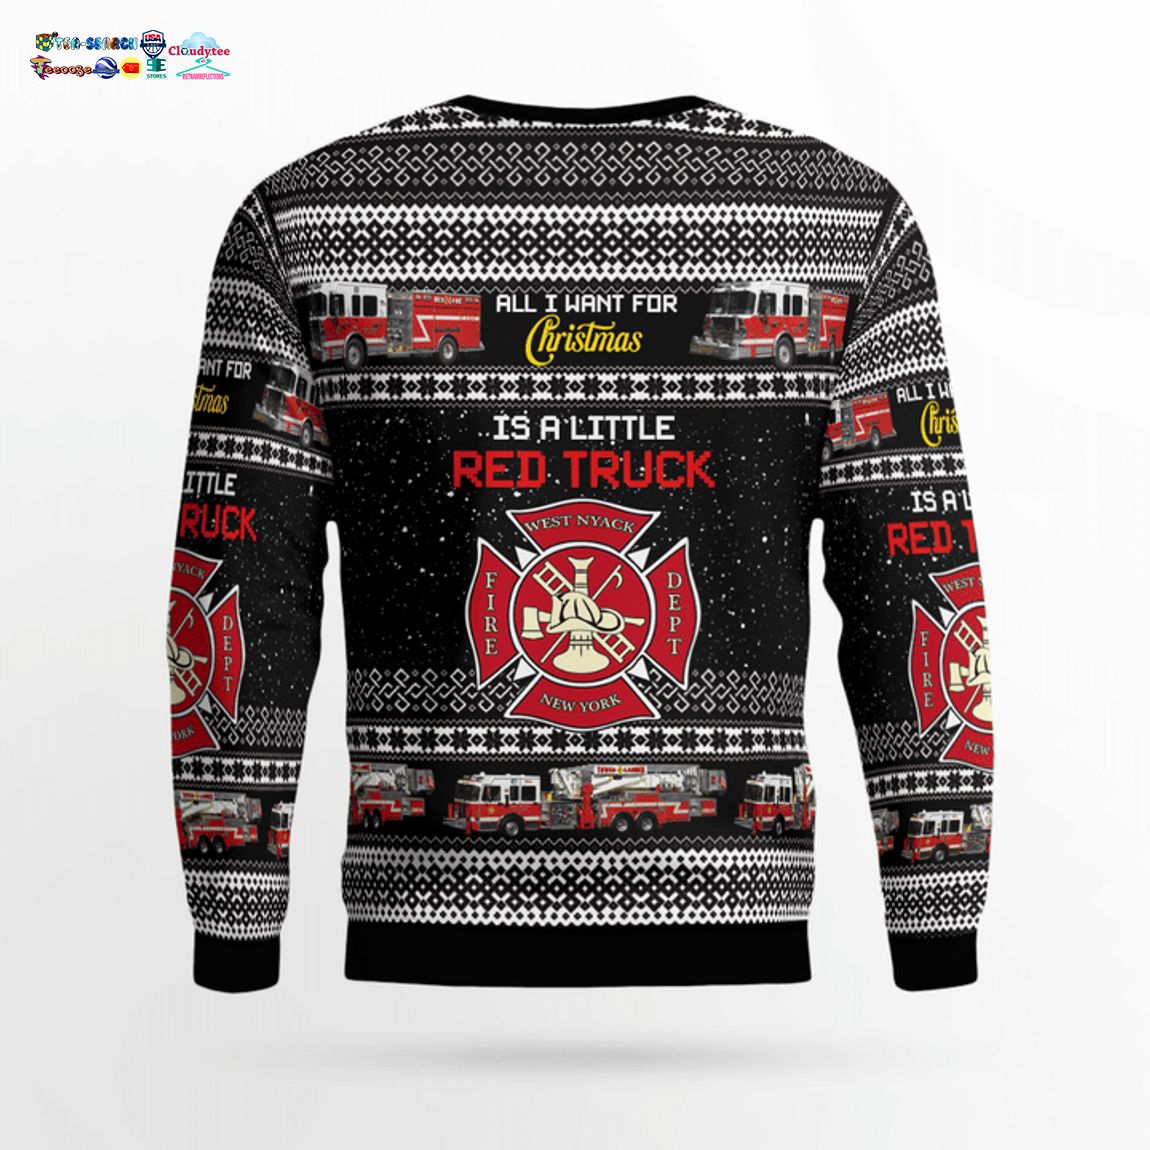 West Nyack Fire Department All I Want For Christmas Is A Little Red Truck 3D Christmas Sweater